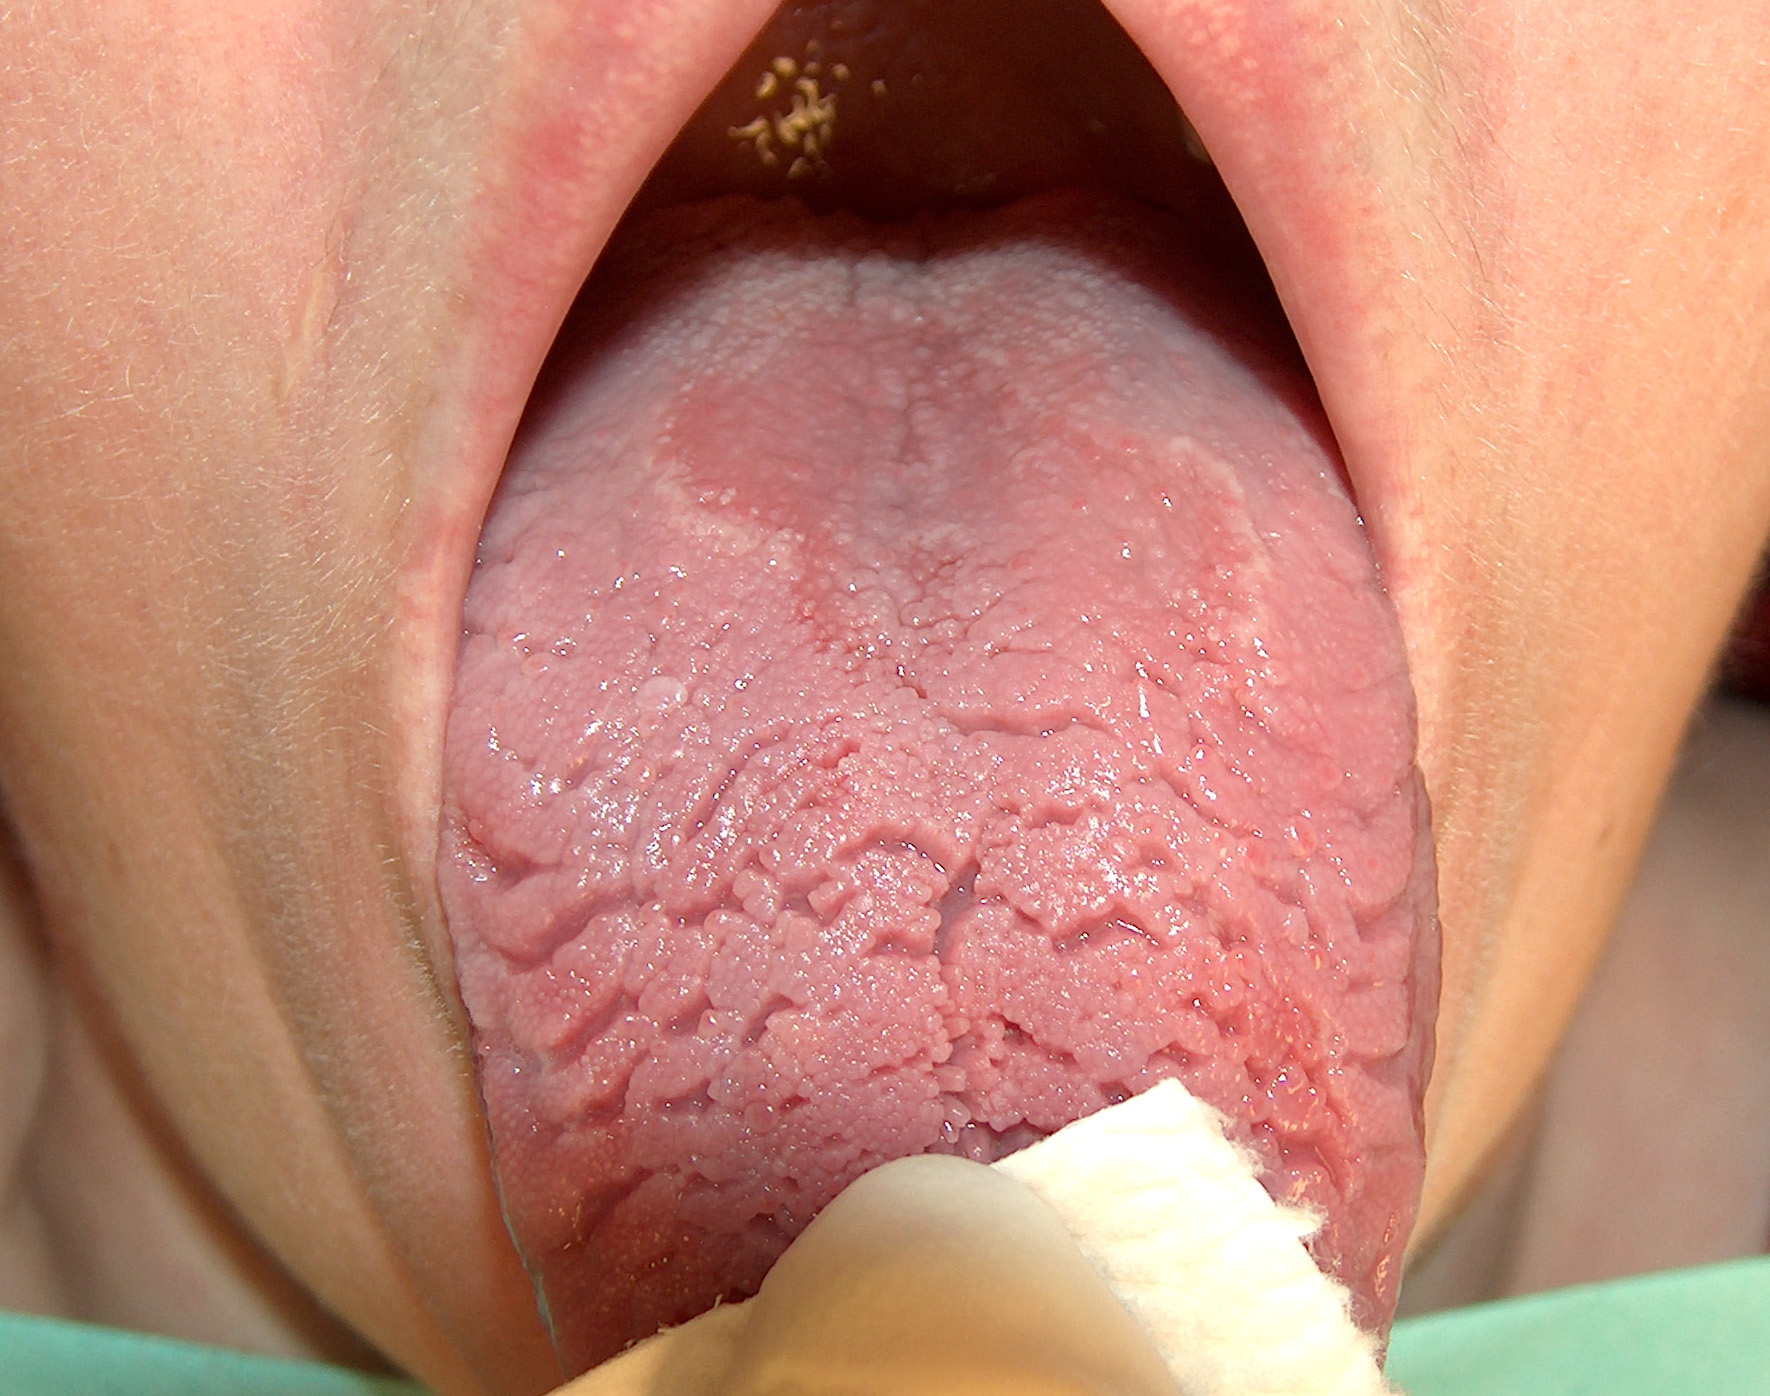 fissured-geographic-tongue